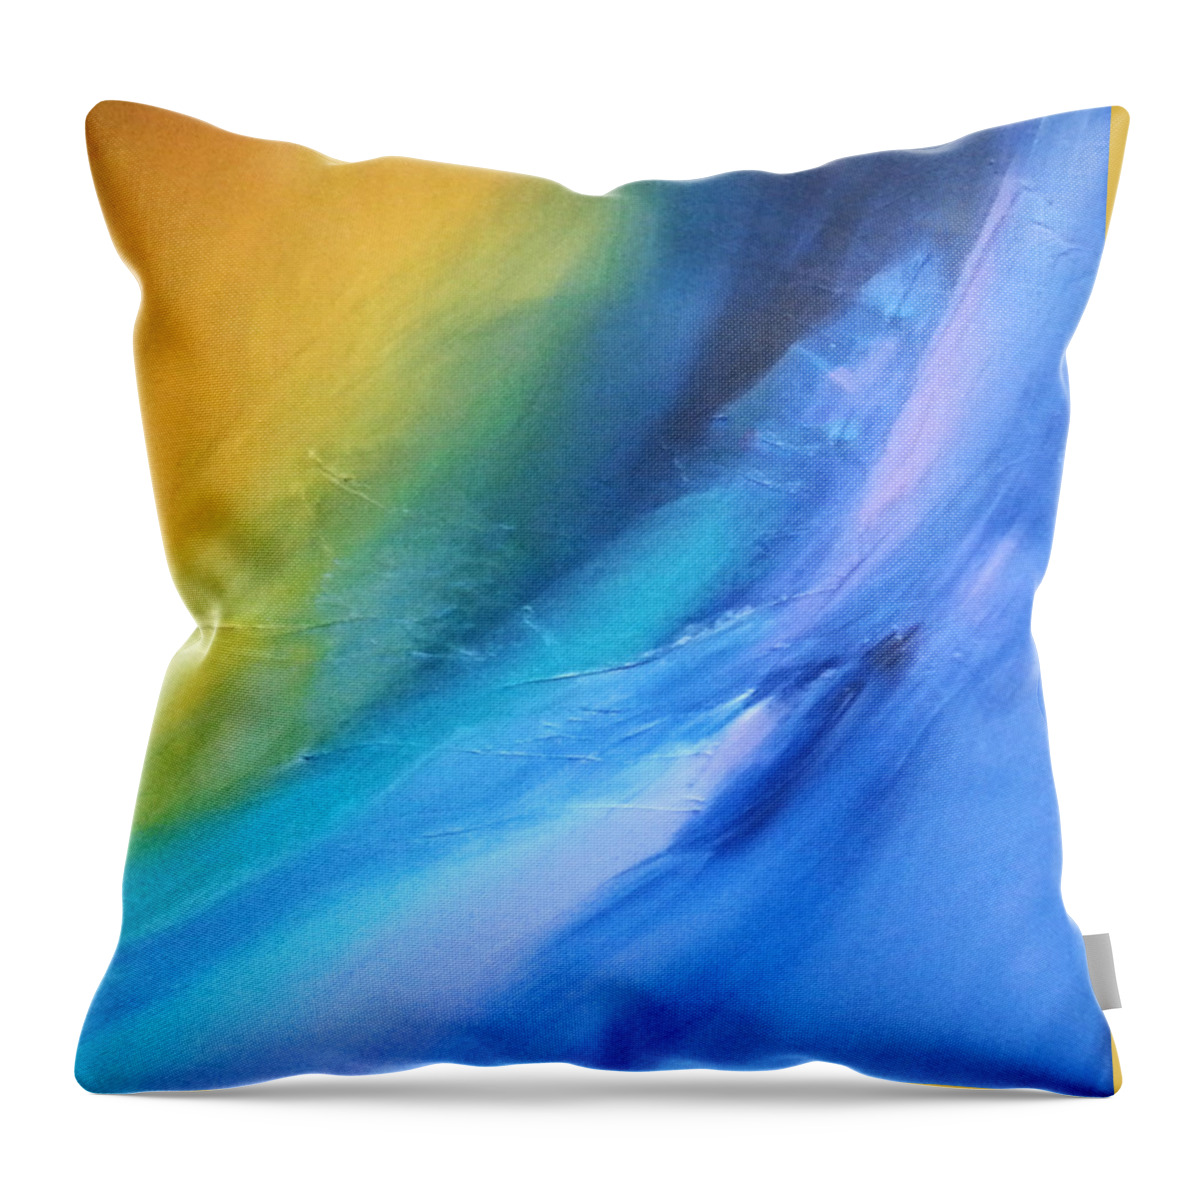 Abstract Throw Pillow featuring the painting Abstract No. 28 by Florentina Maria Popescu